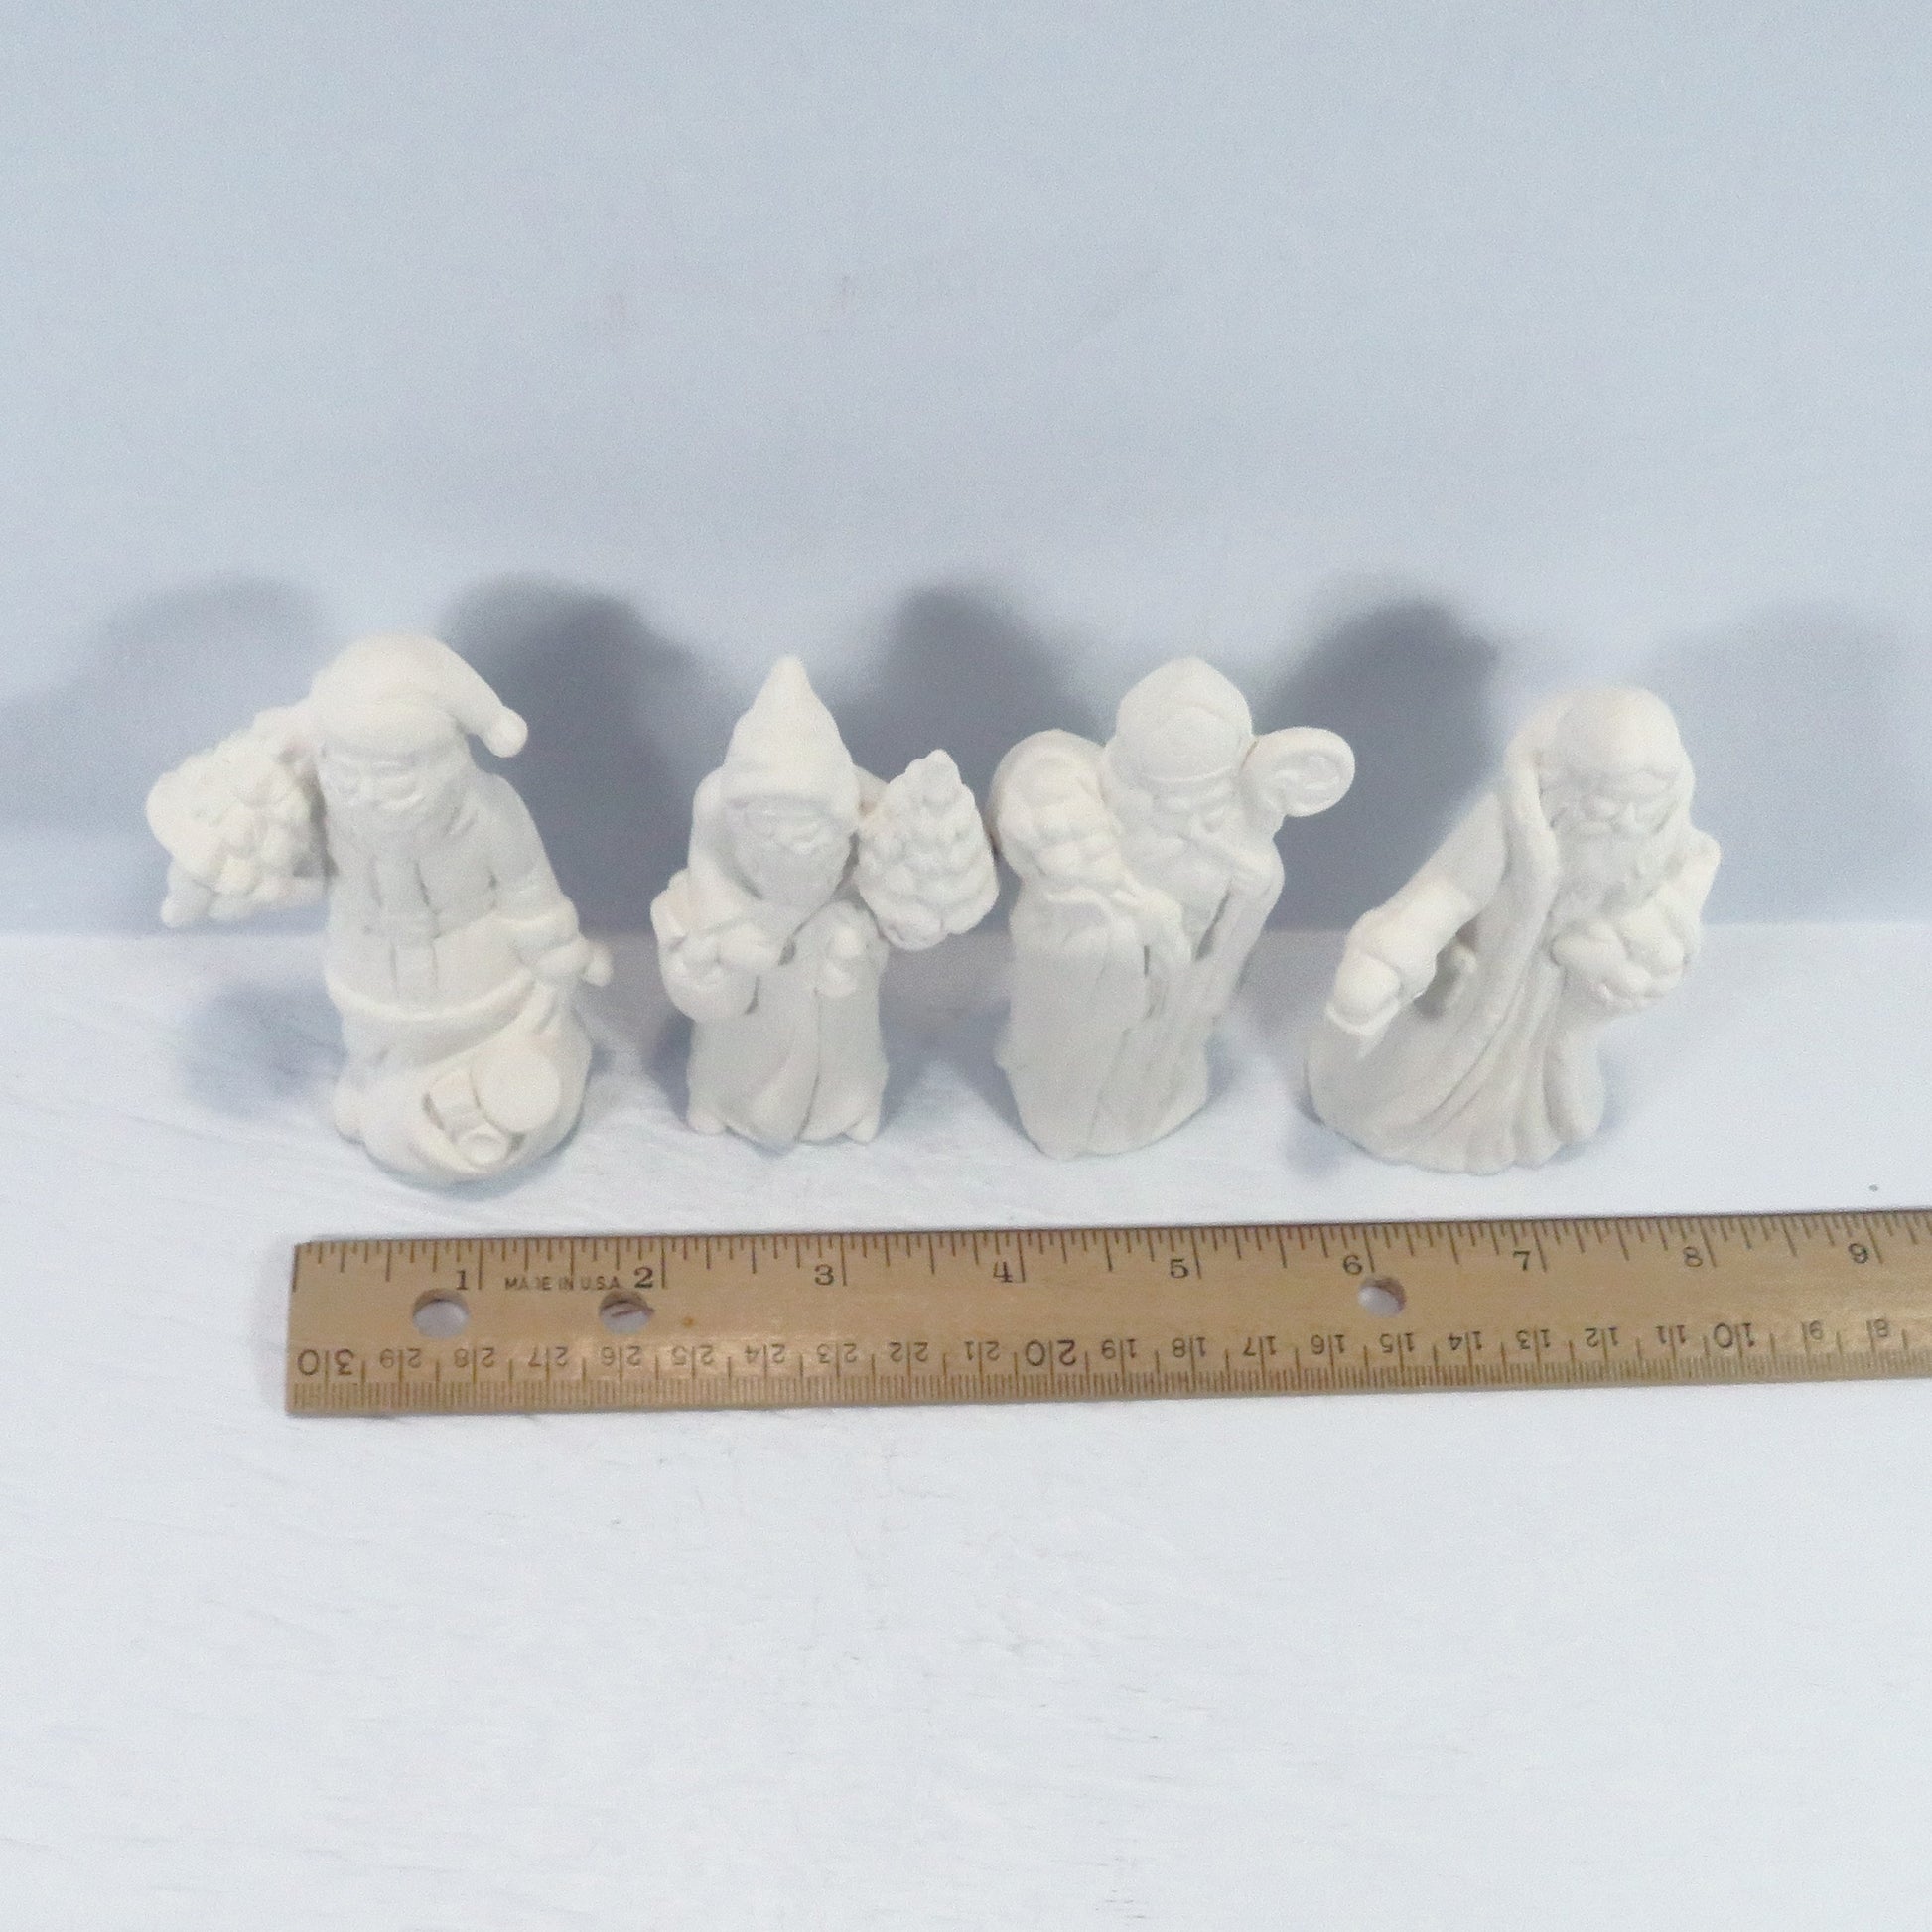 View from above of 4 handmade ceramic santa figurines near a ruler showing them to be approximately 2 inches wide.